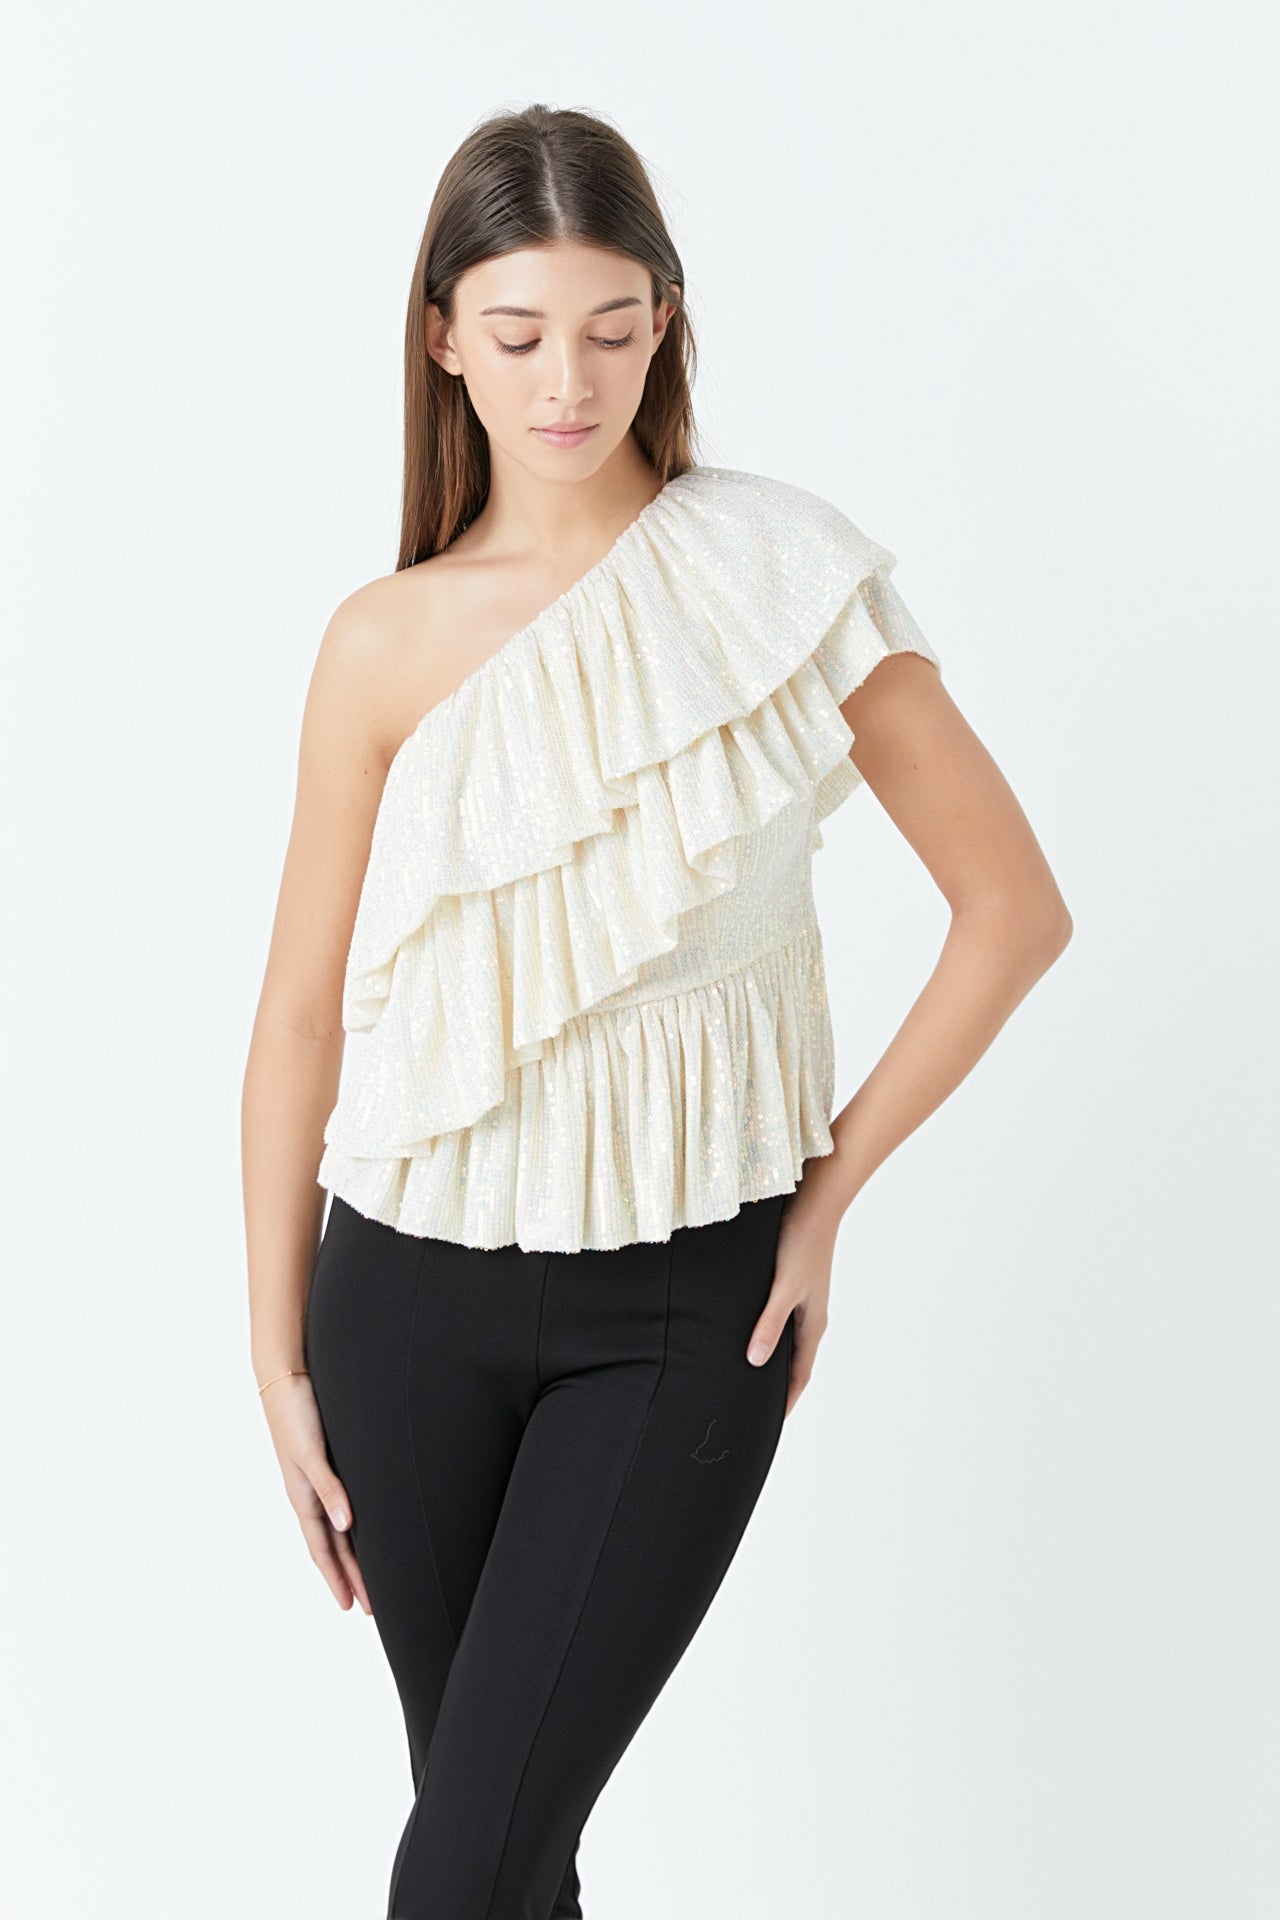 ENDLESS ROSE - Sequins One Shoulder Ruffle Top - TOPS available at Objectrare